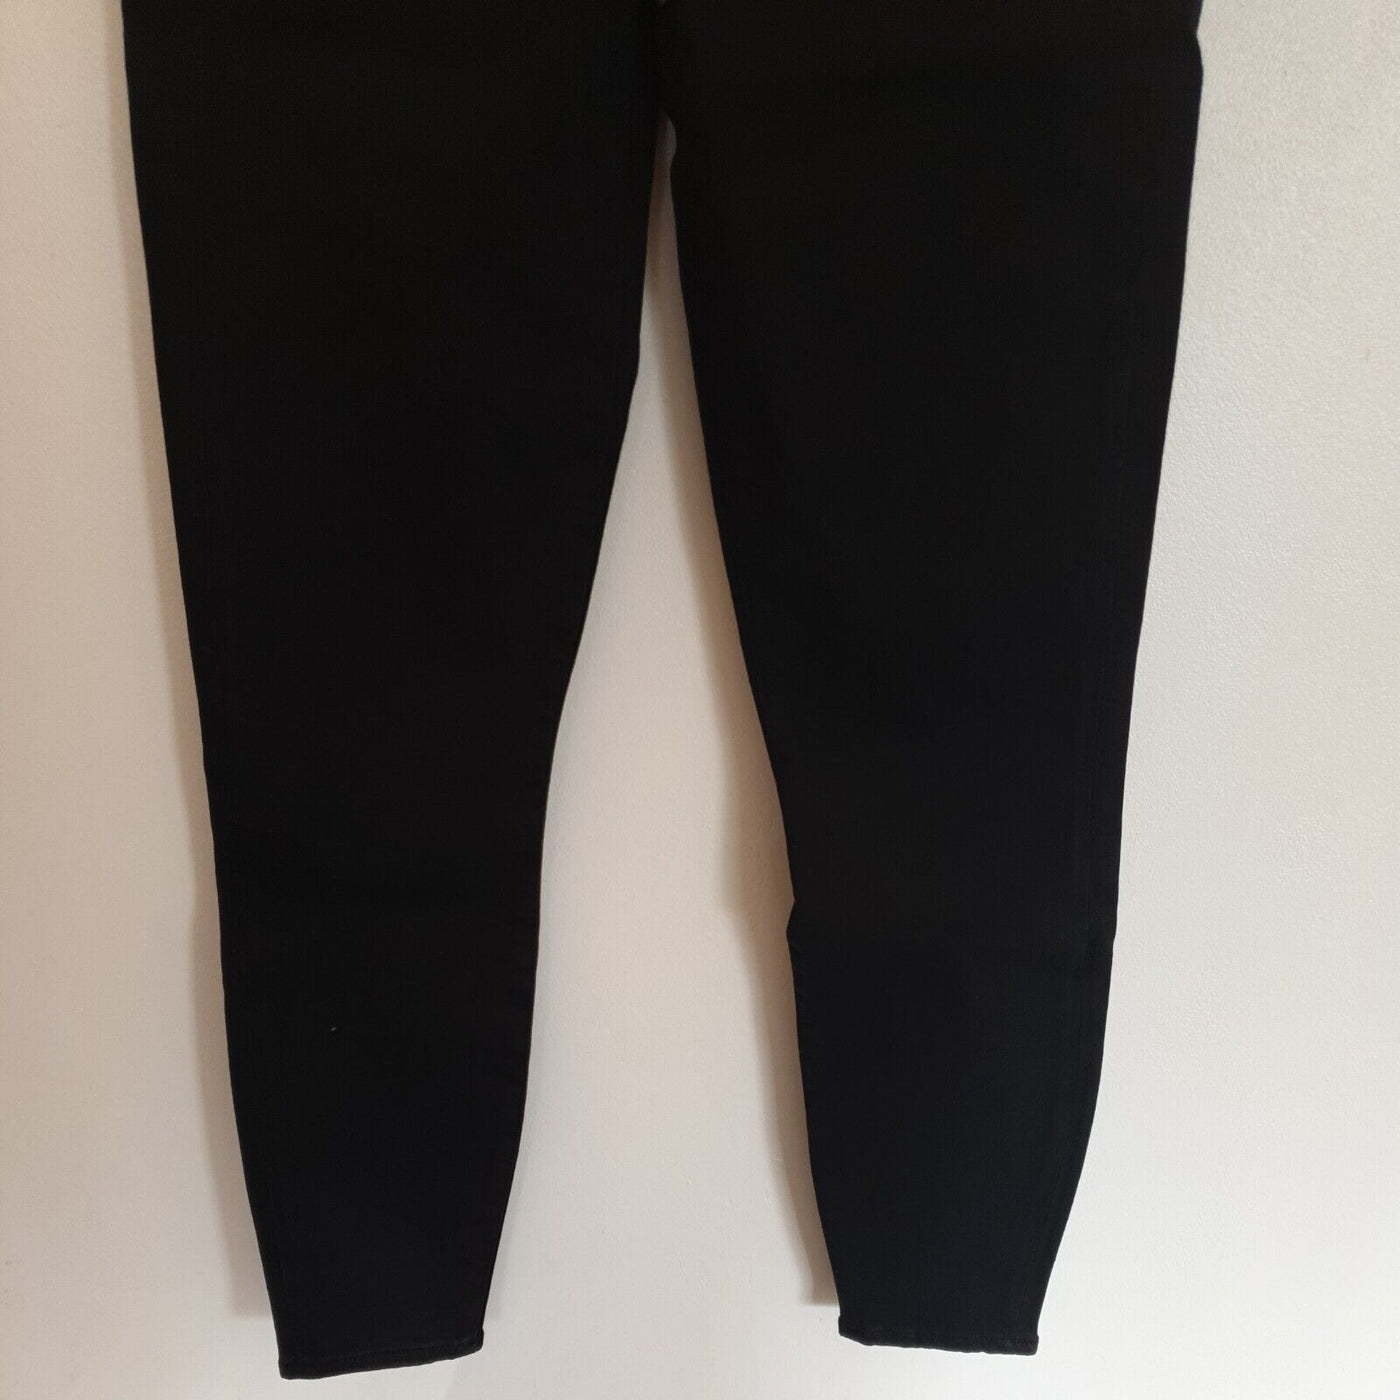 For All Mankind Aubrey Slim Illusion Luxe Gravity Jeans Black Size 26 **** V317